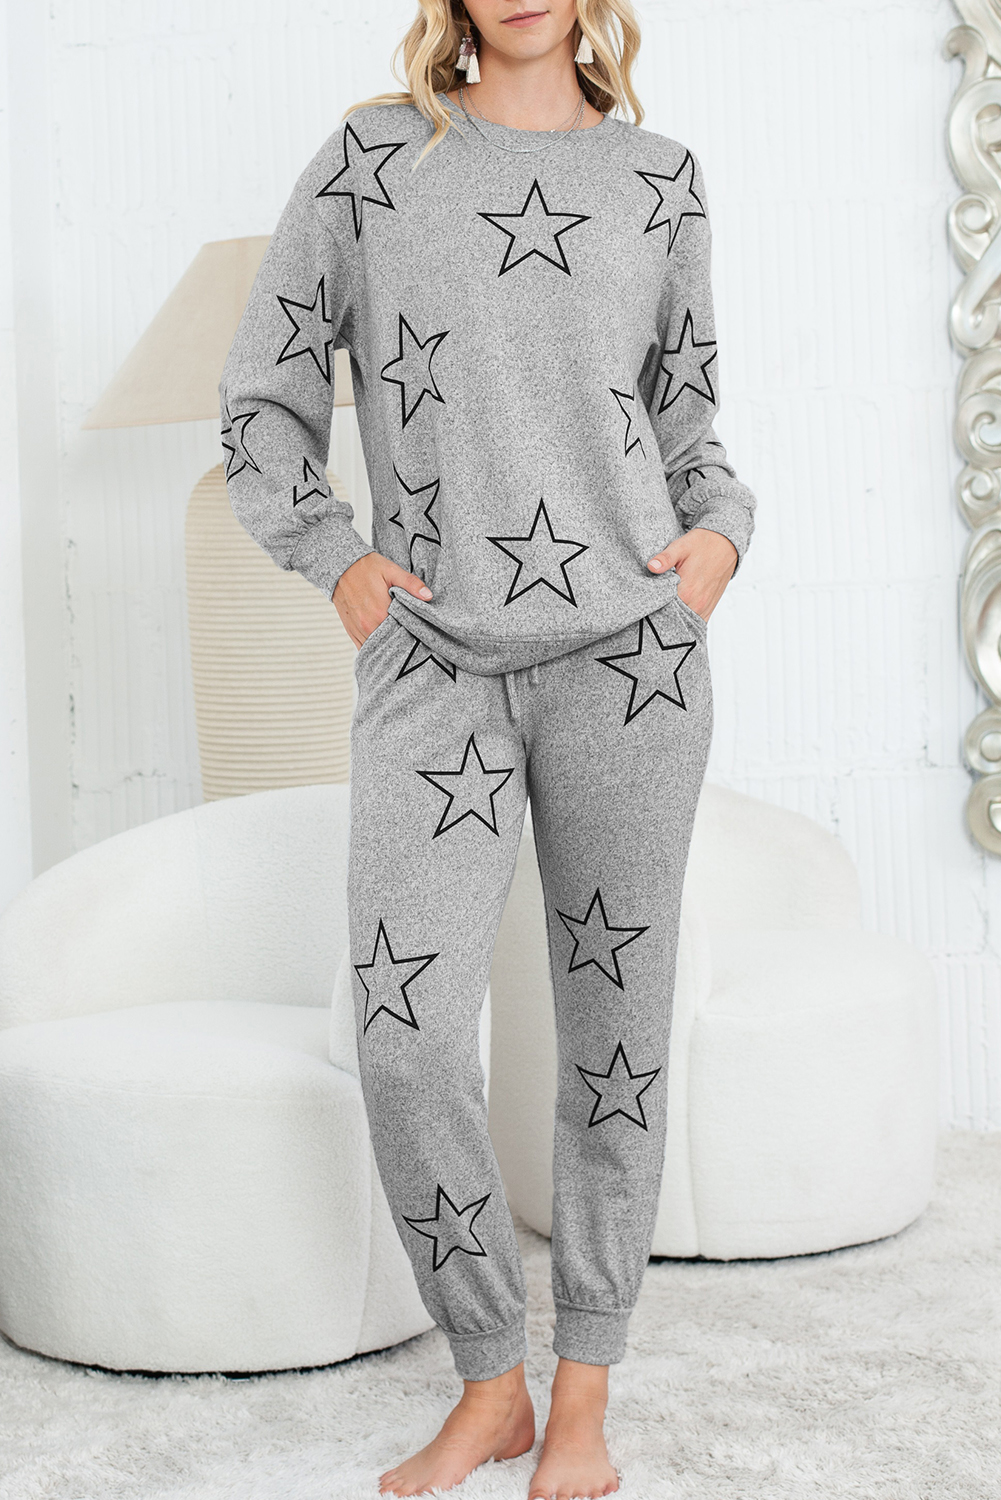 Shewin Wholesale Western Boutique Gray Stars Print Long Sleeve Top and Drawstring PANTS Set